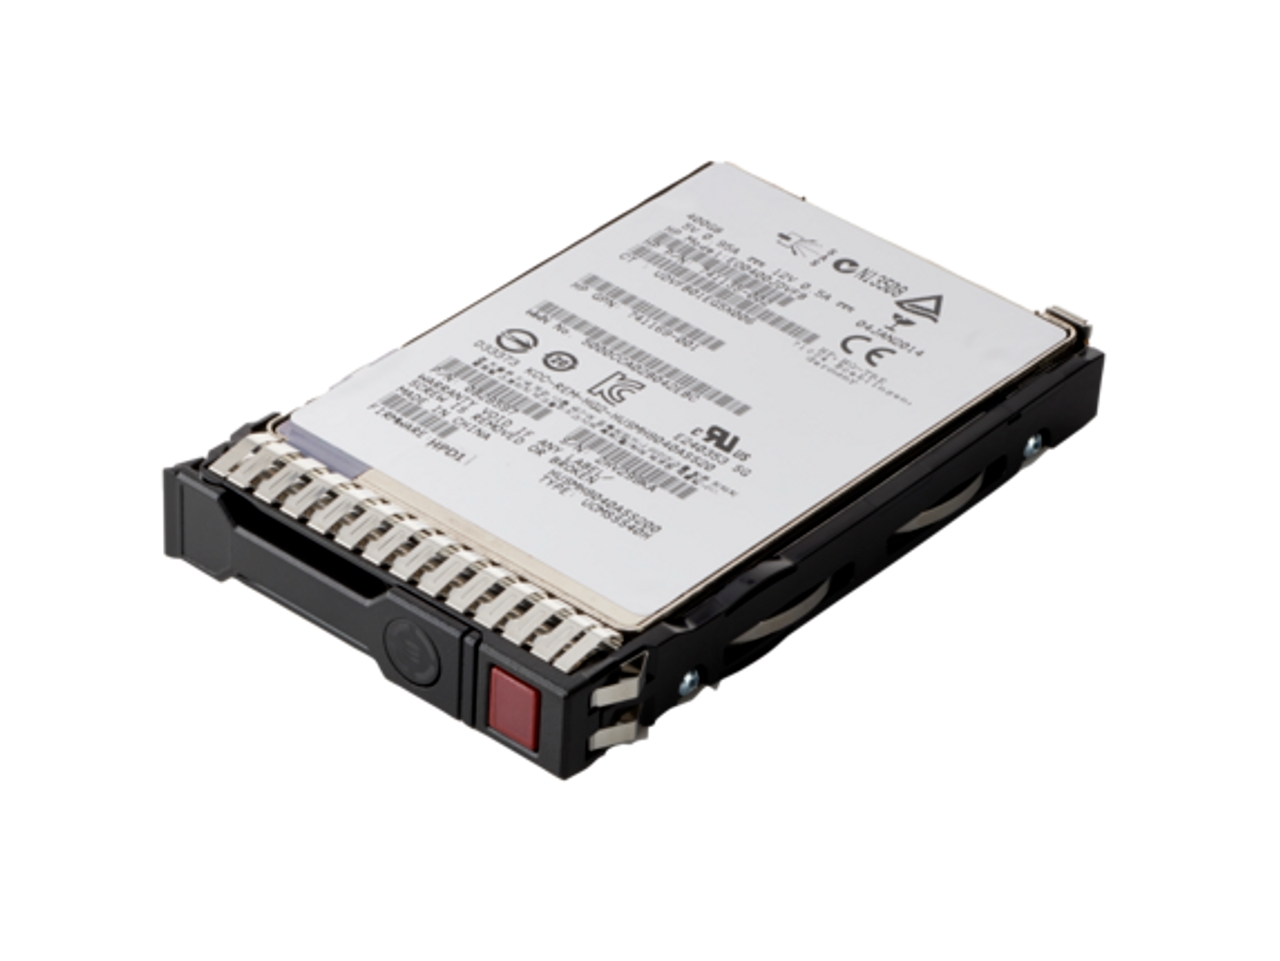 HPE 400GB SAS WI SC DS 2.5 SSD Solid State Drive EO000400JWUGC HP